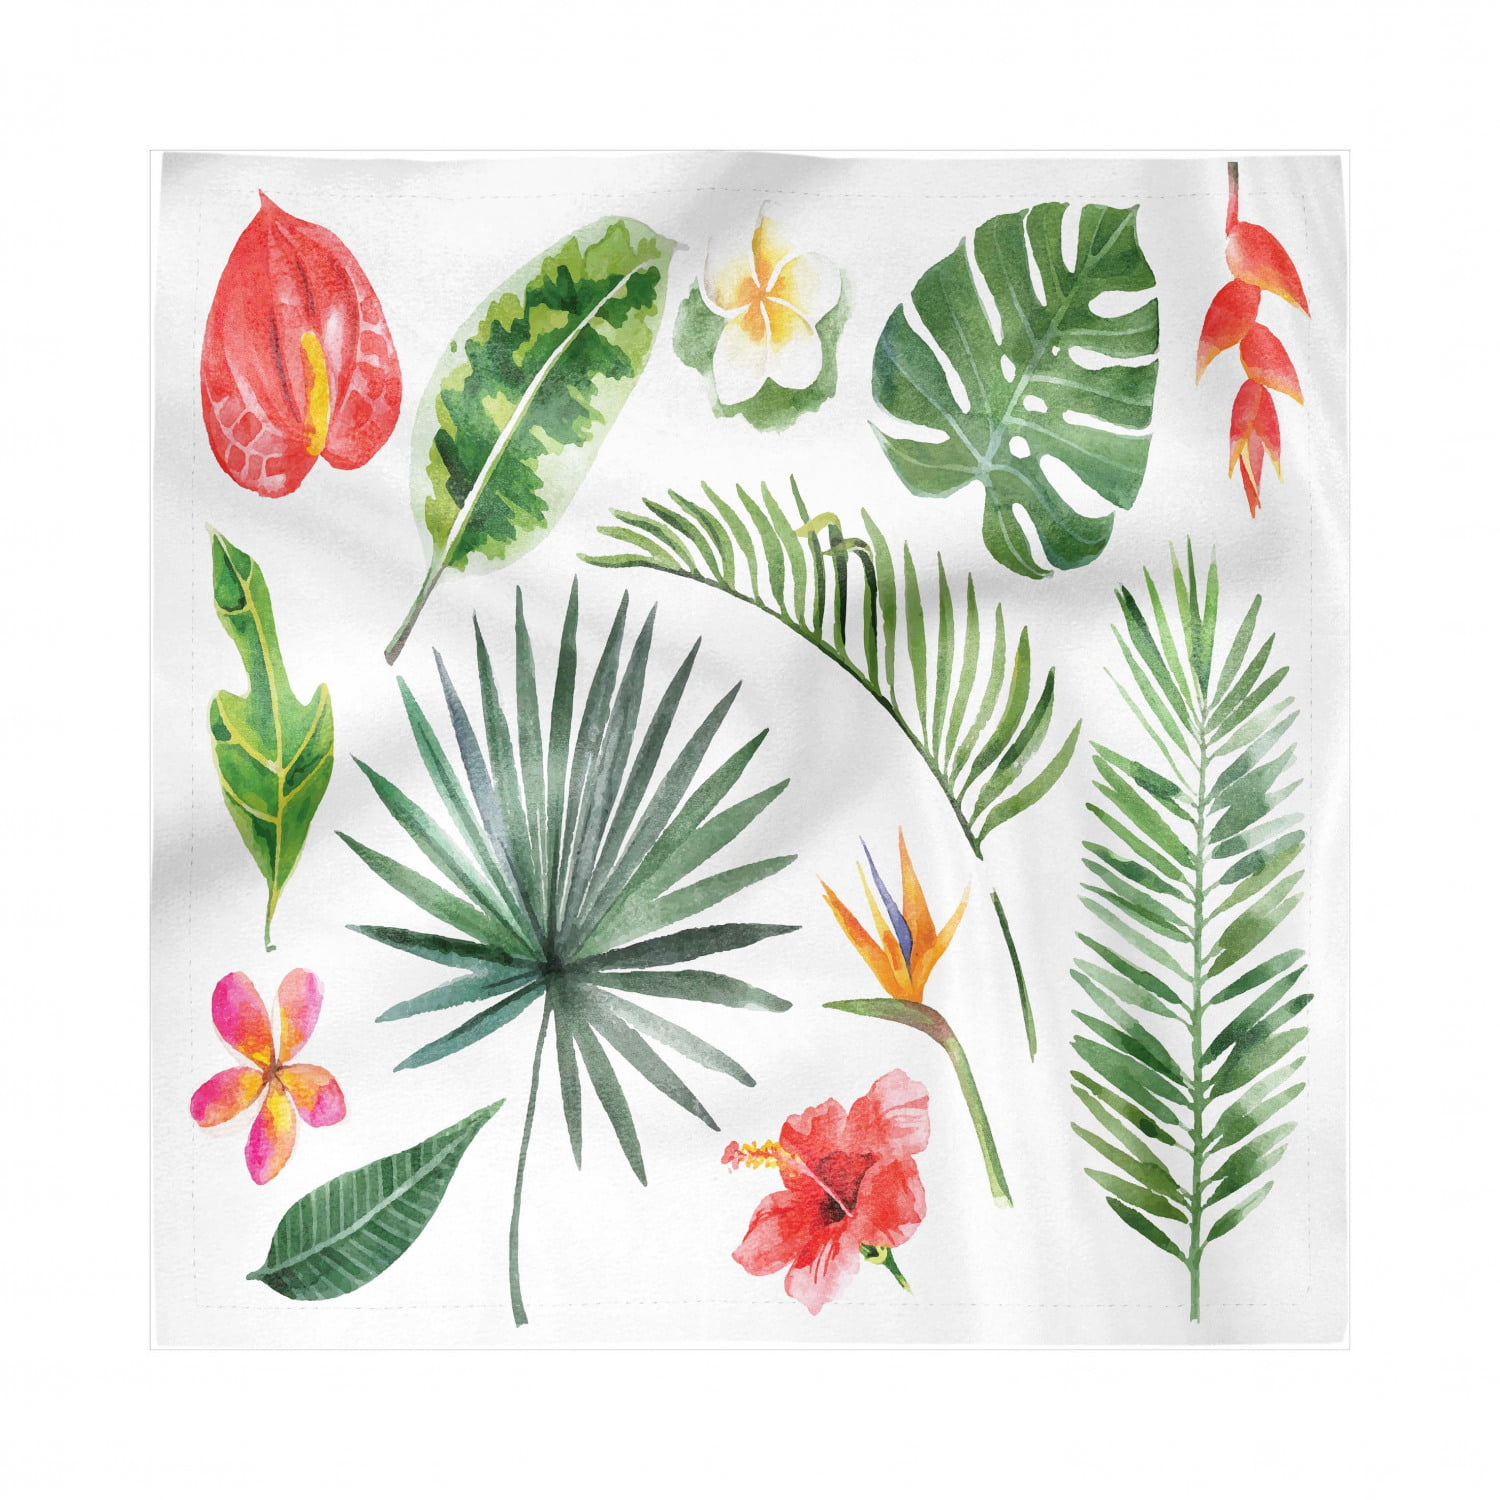 Ambesonne Palm Tree Table Runner 16 X 72 Multicolor Dining Room Kitchen Rectangular Runner Tropical Island Inspired Pattern with Flamingo Birds Hibiscus Flowers Watercolors